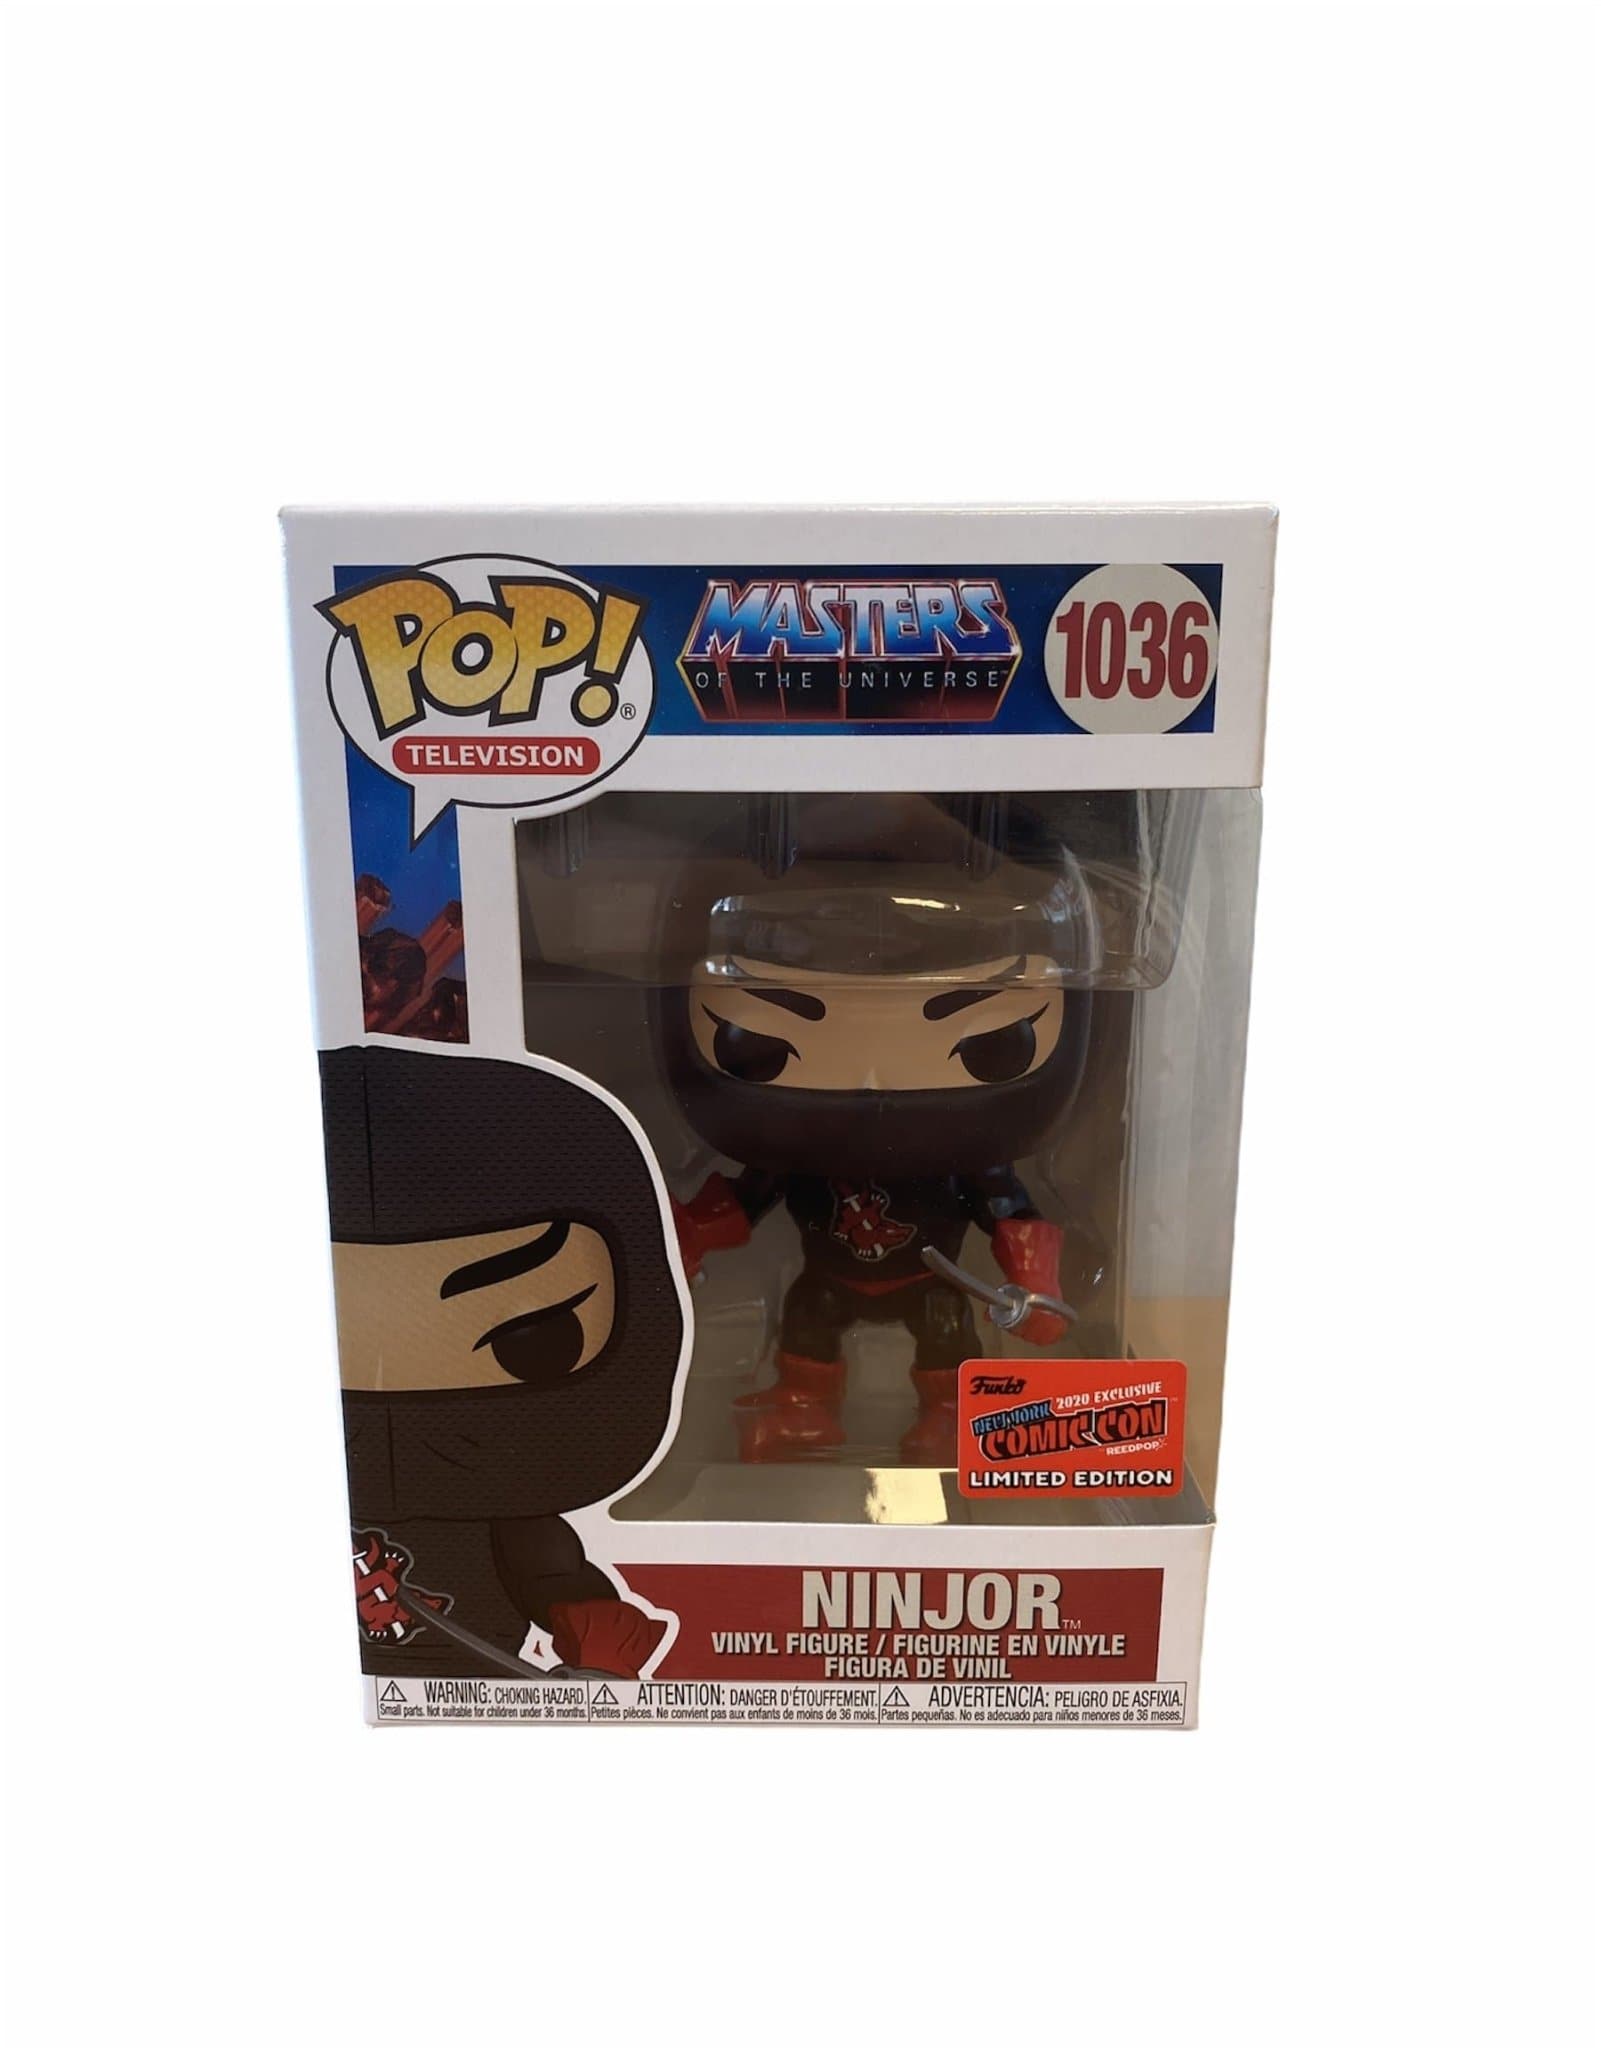 Ninjor #1036 Funko Pop! Masters Of The Universe. NYCC 2020 Official Convention Exclusive. - Pop Figures